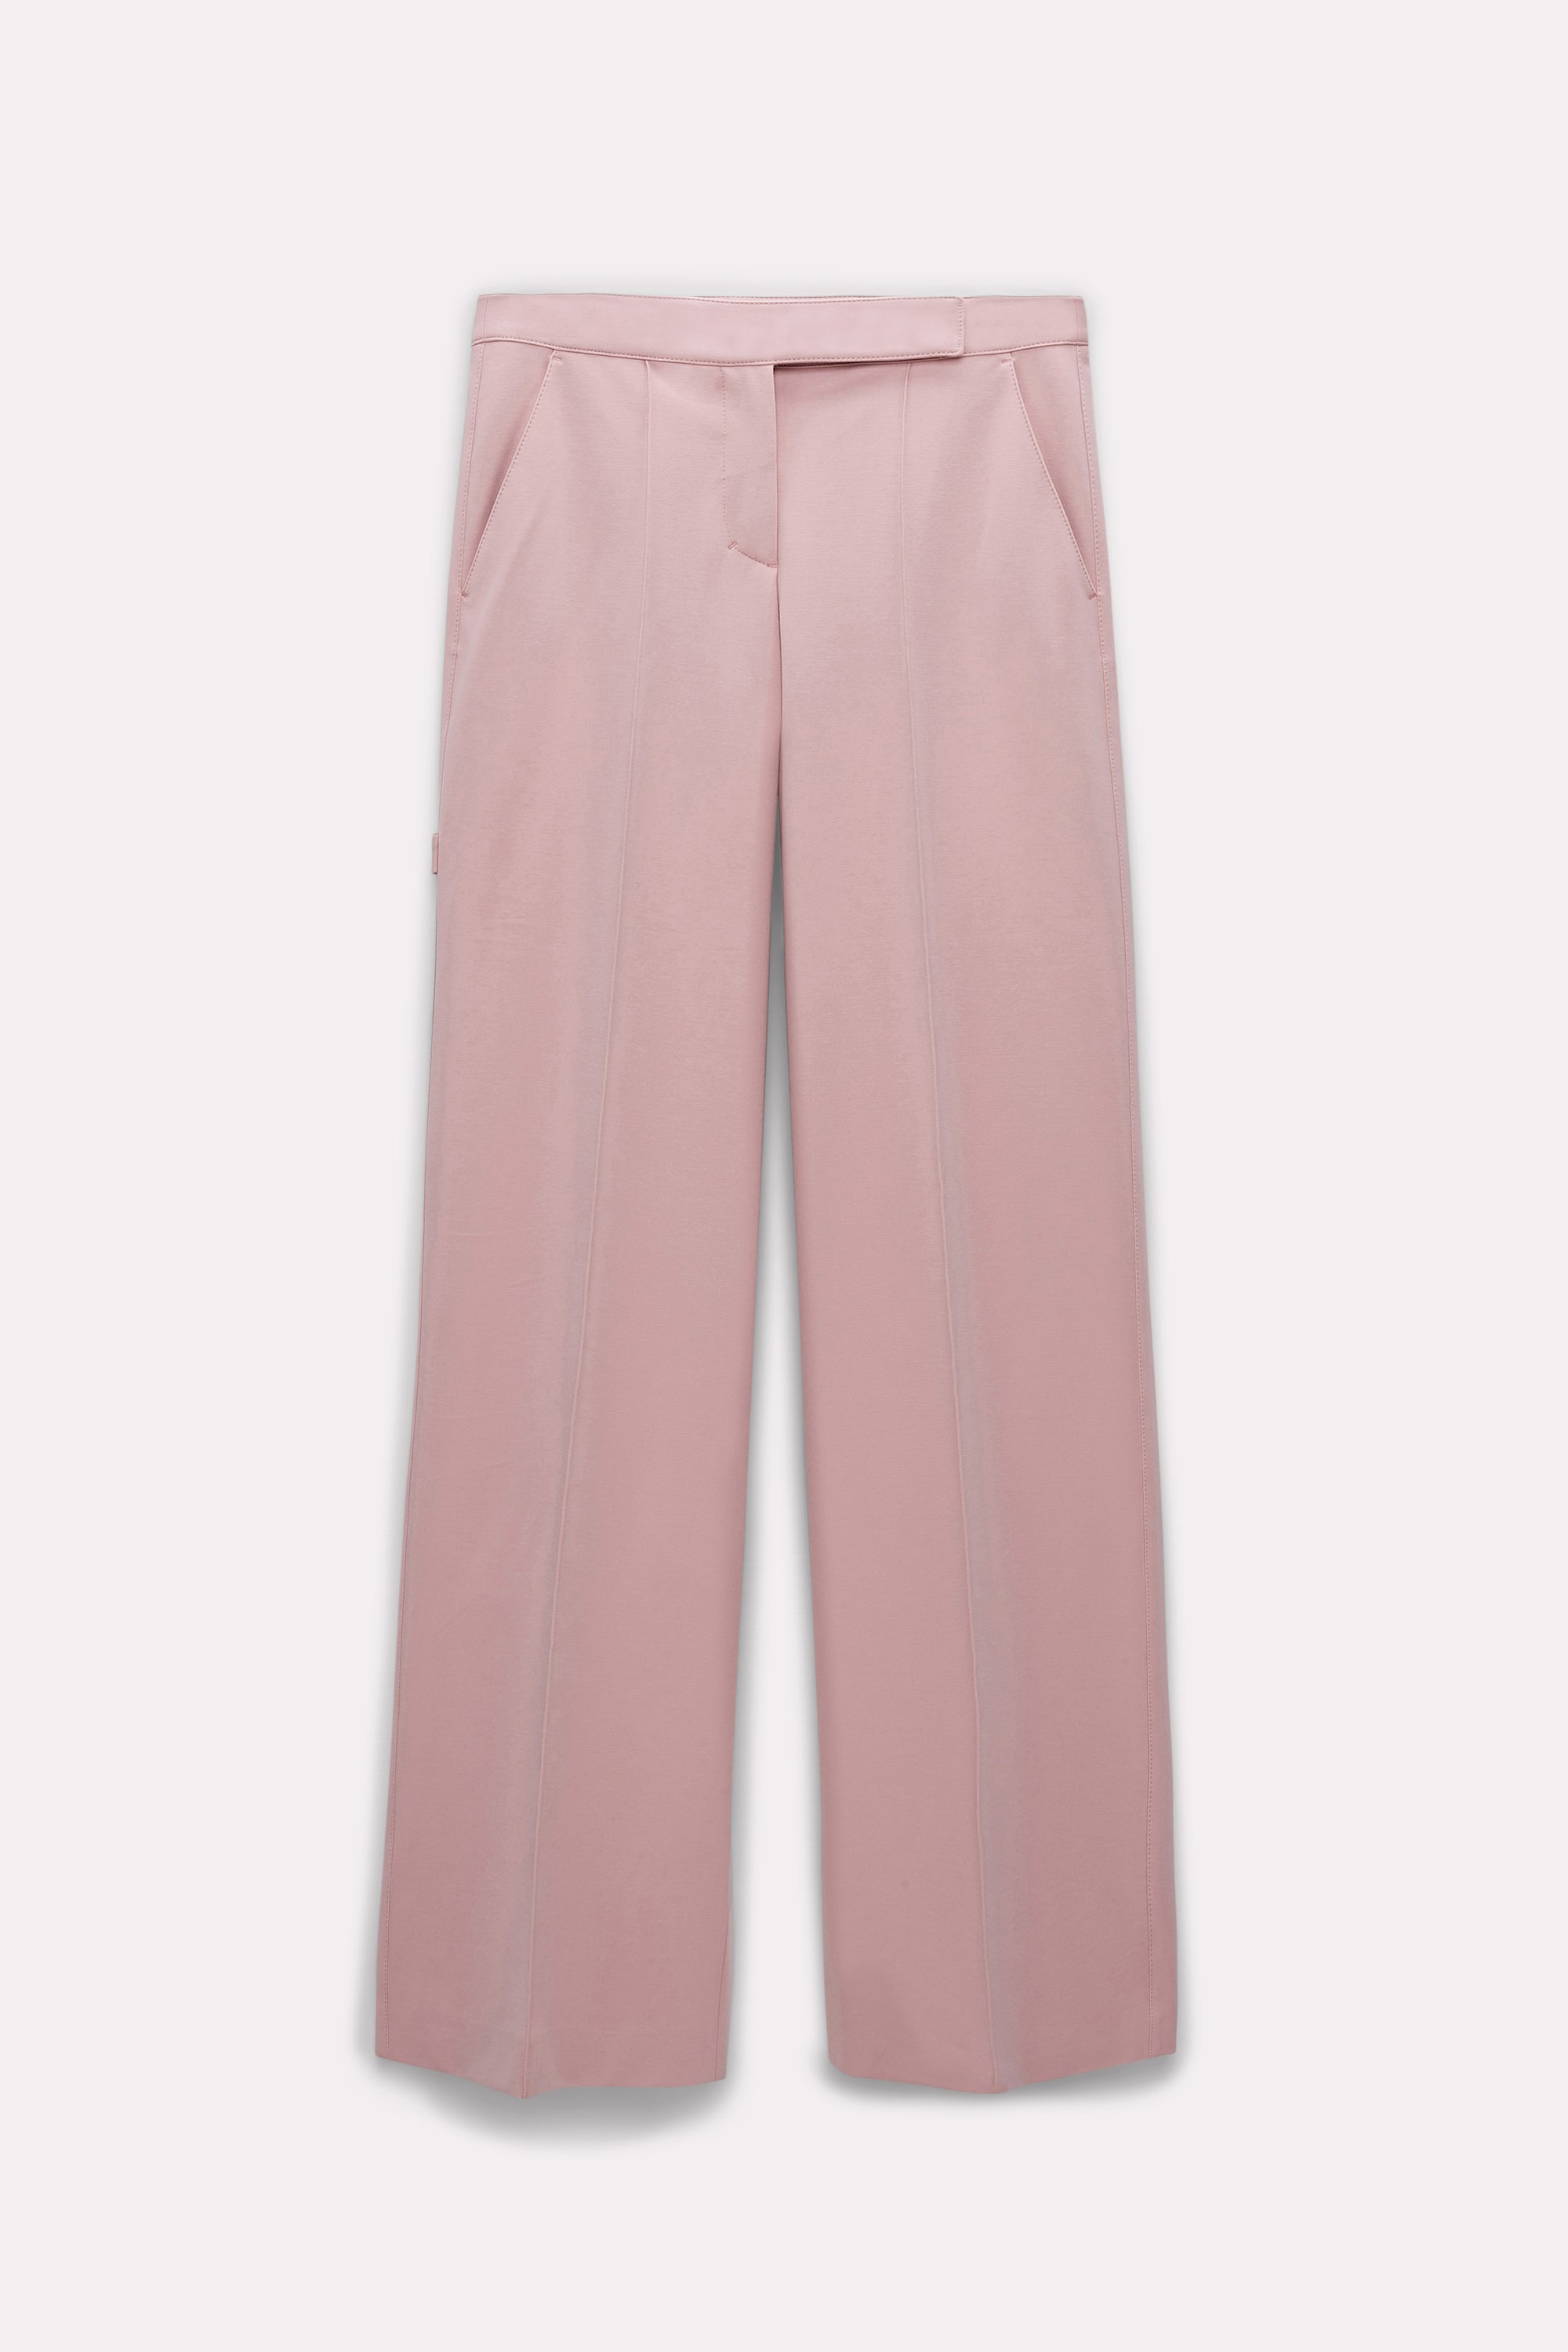 Emotional Essence Pants by Dorothee Schumacher